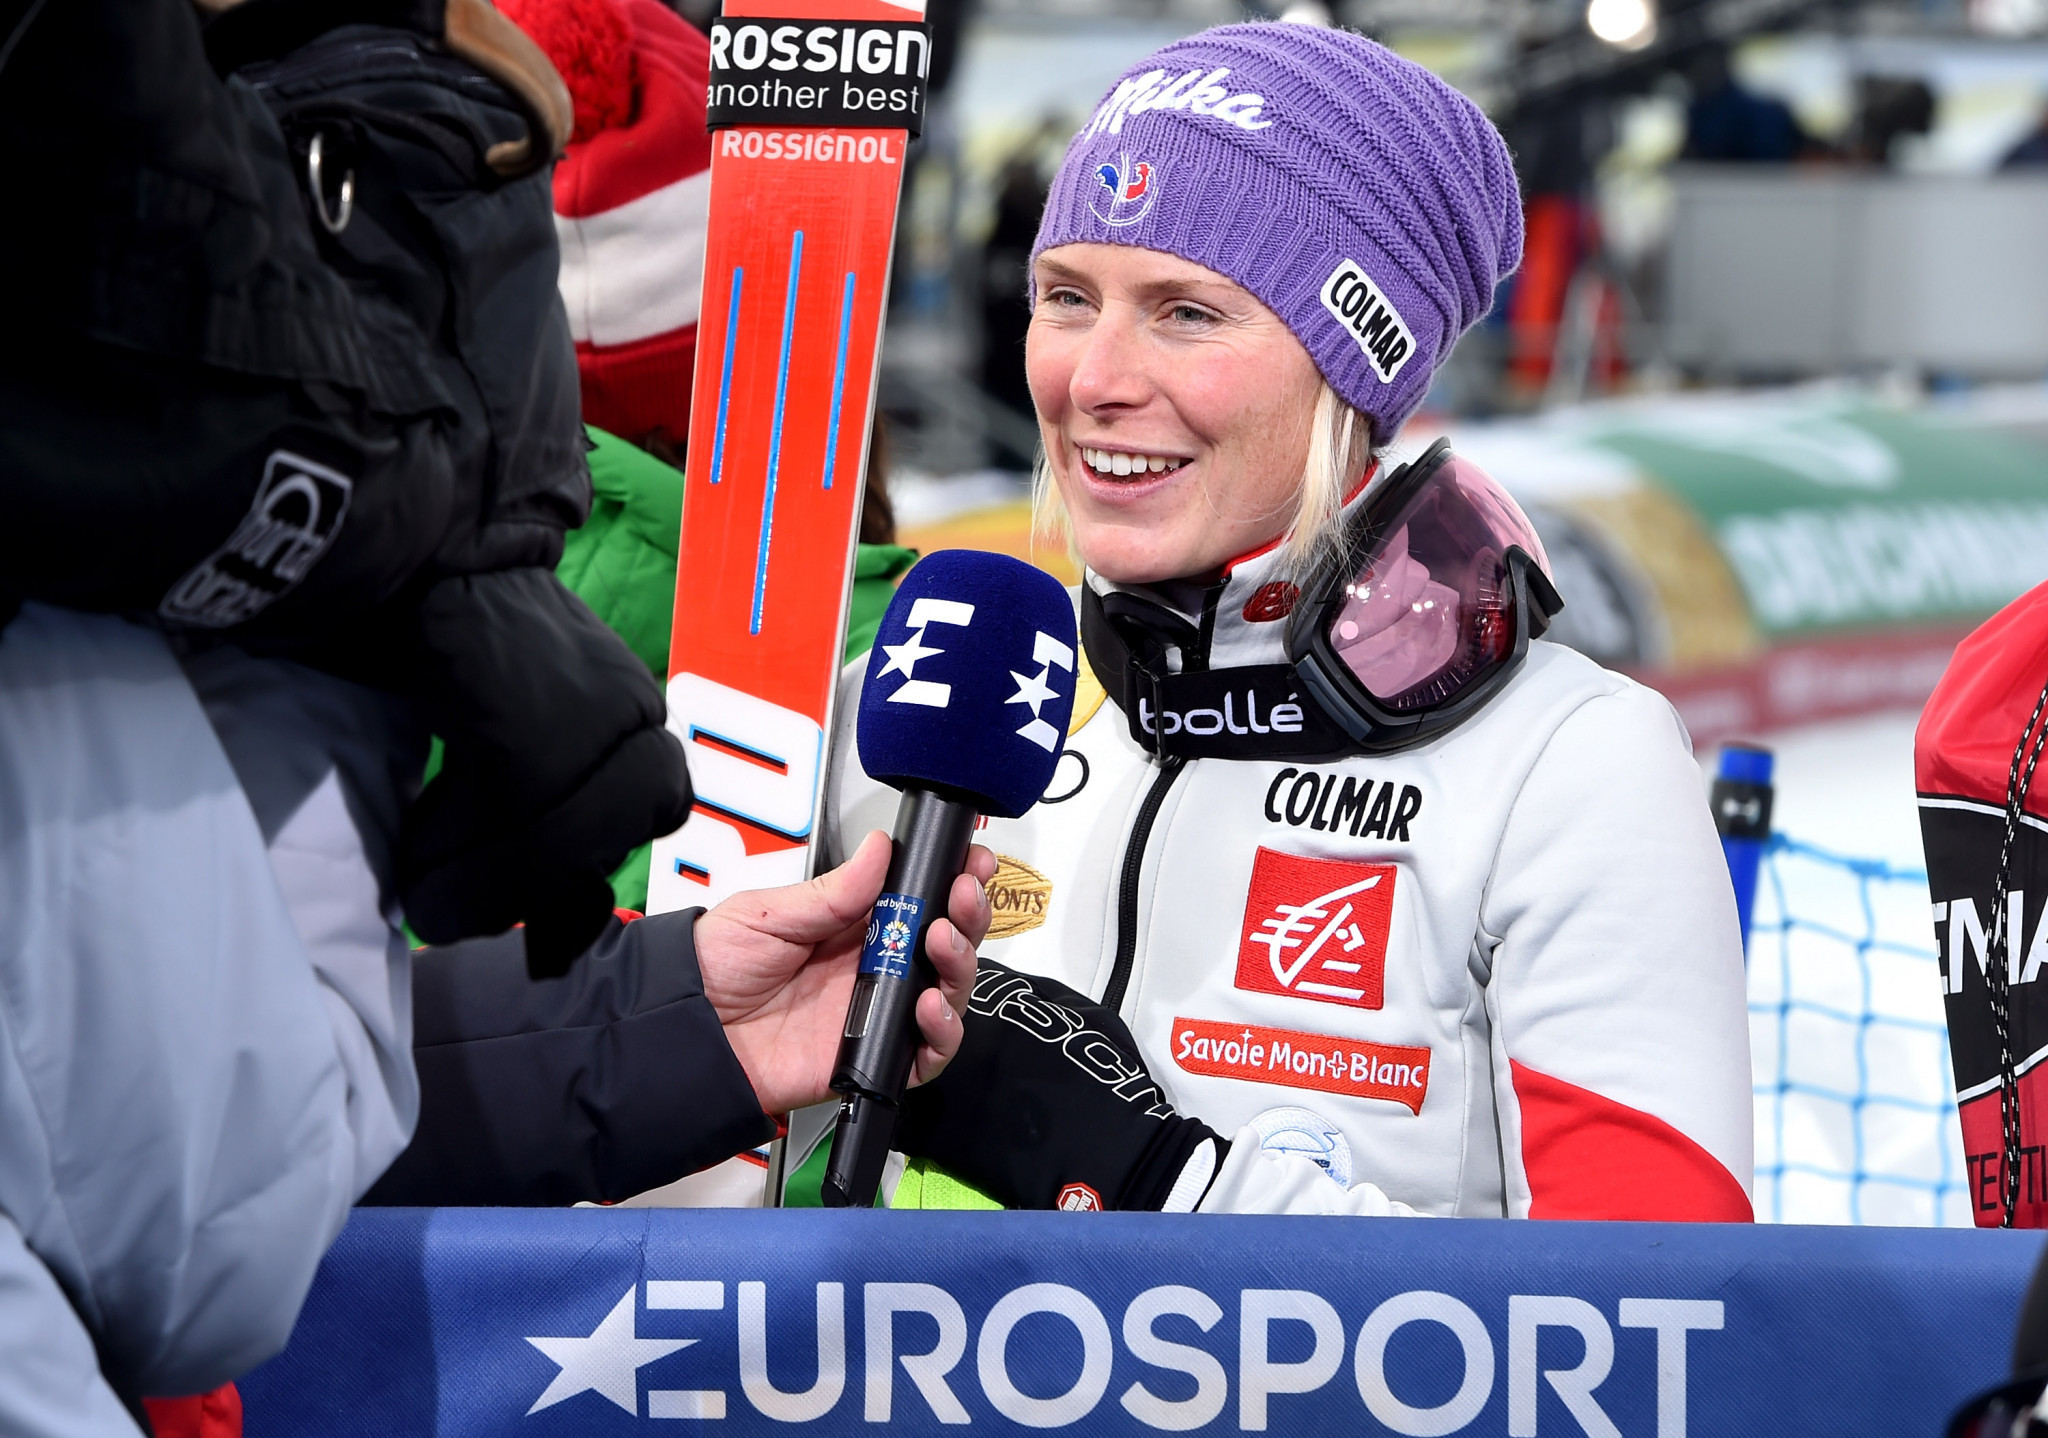 Eurosport in action at this year's FIS World Championships in St Moritz ©Eurosport